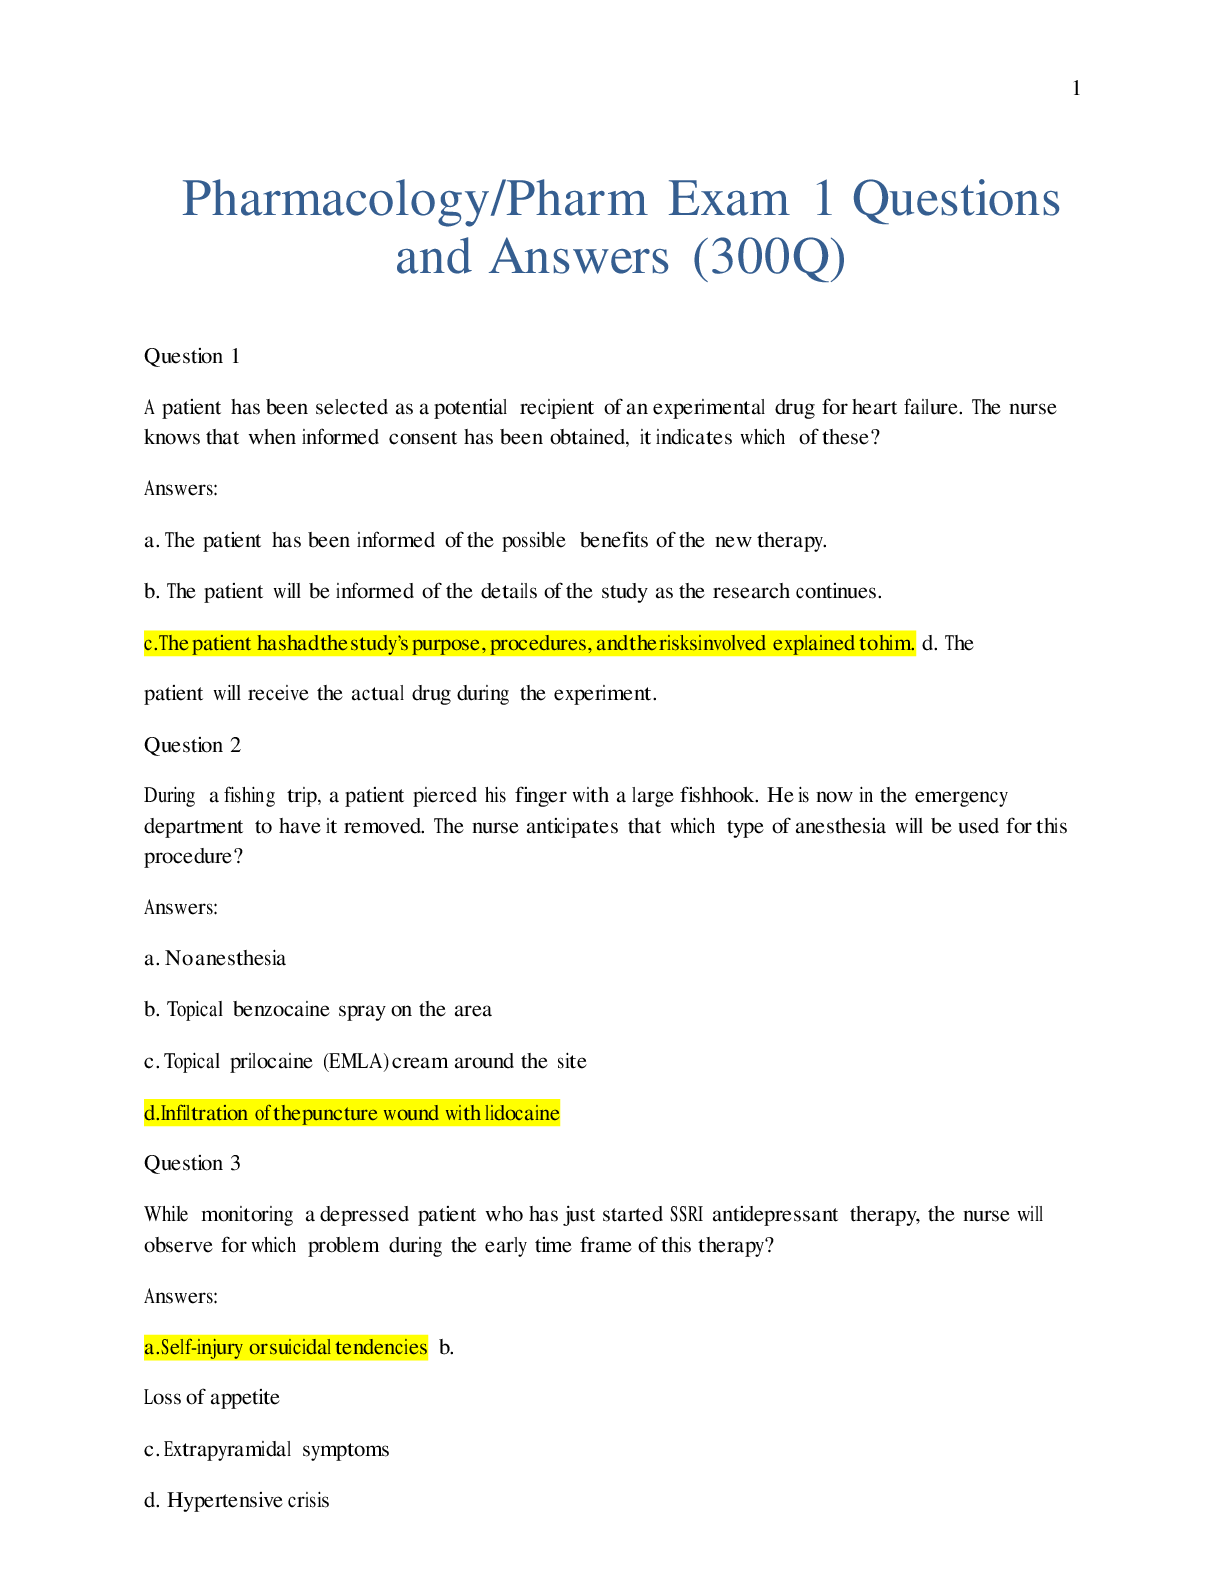 pharmacology essay questions and answers